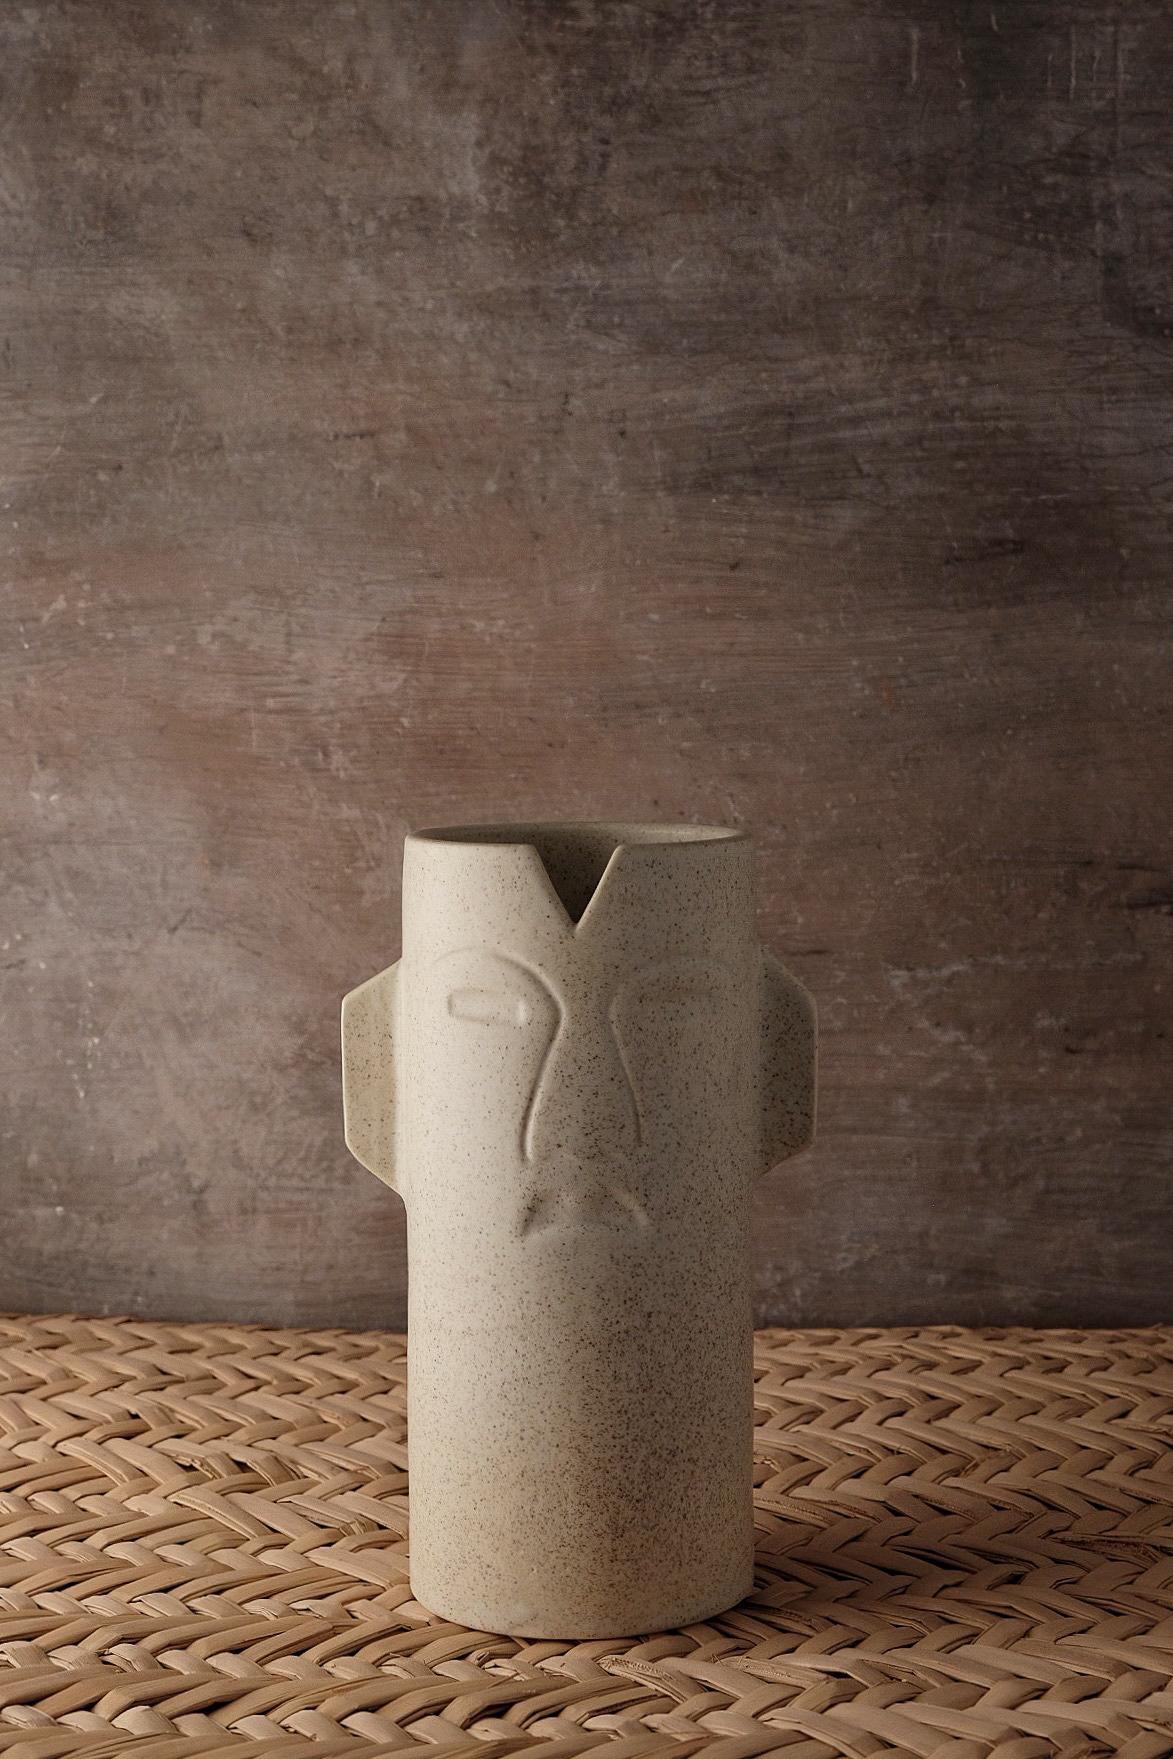 Chac ceramic vase by Onora
Dimensions: D 12 x 25 cm
Materials: Ceramic
Available in black, white and sand.

This ceramic vase refers pre-hispanic ceremonial masks. Molded by artisans from the State of Mexico.

This collection reinterprets one